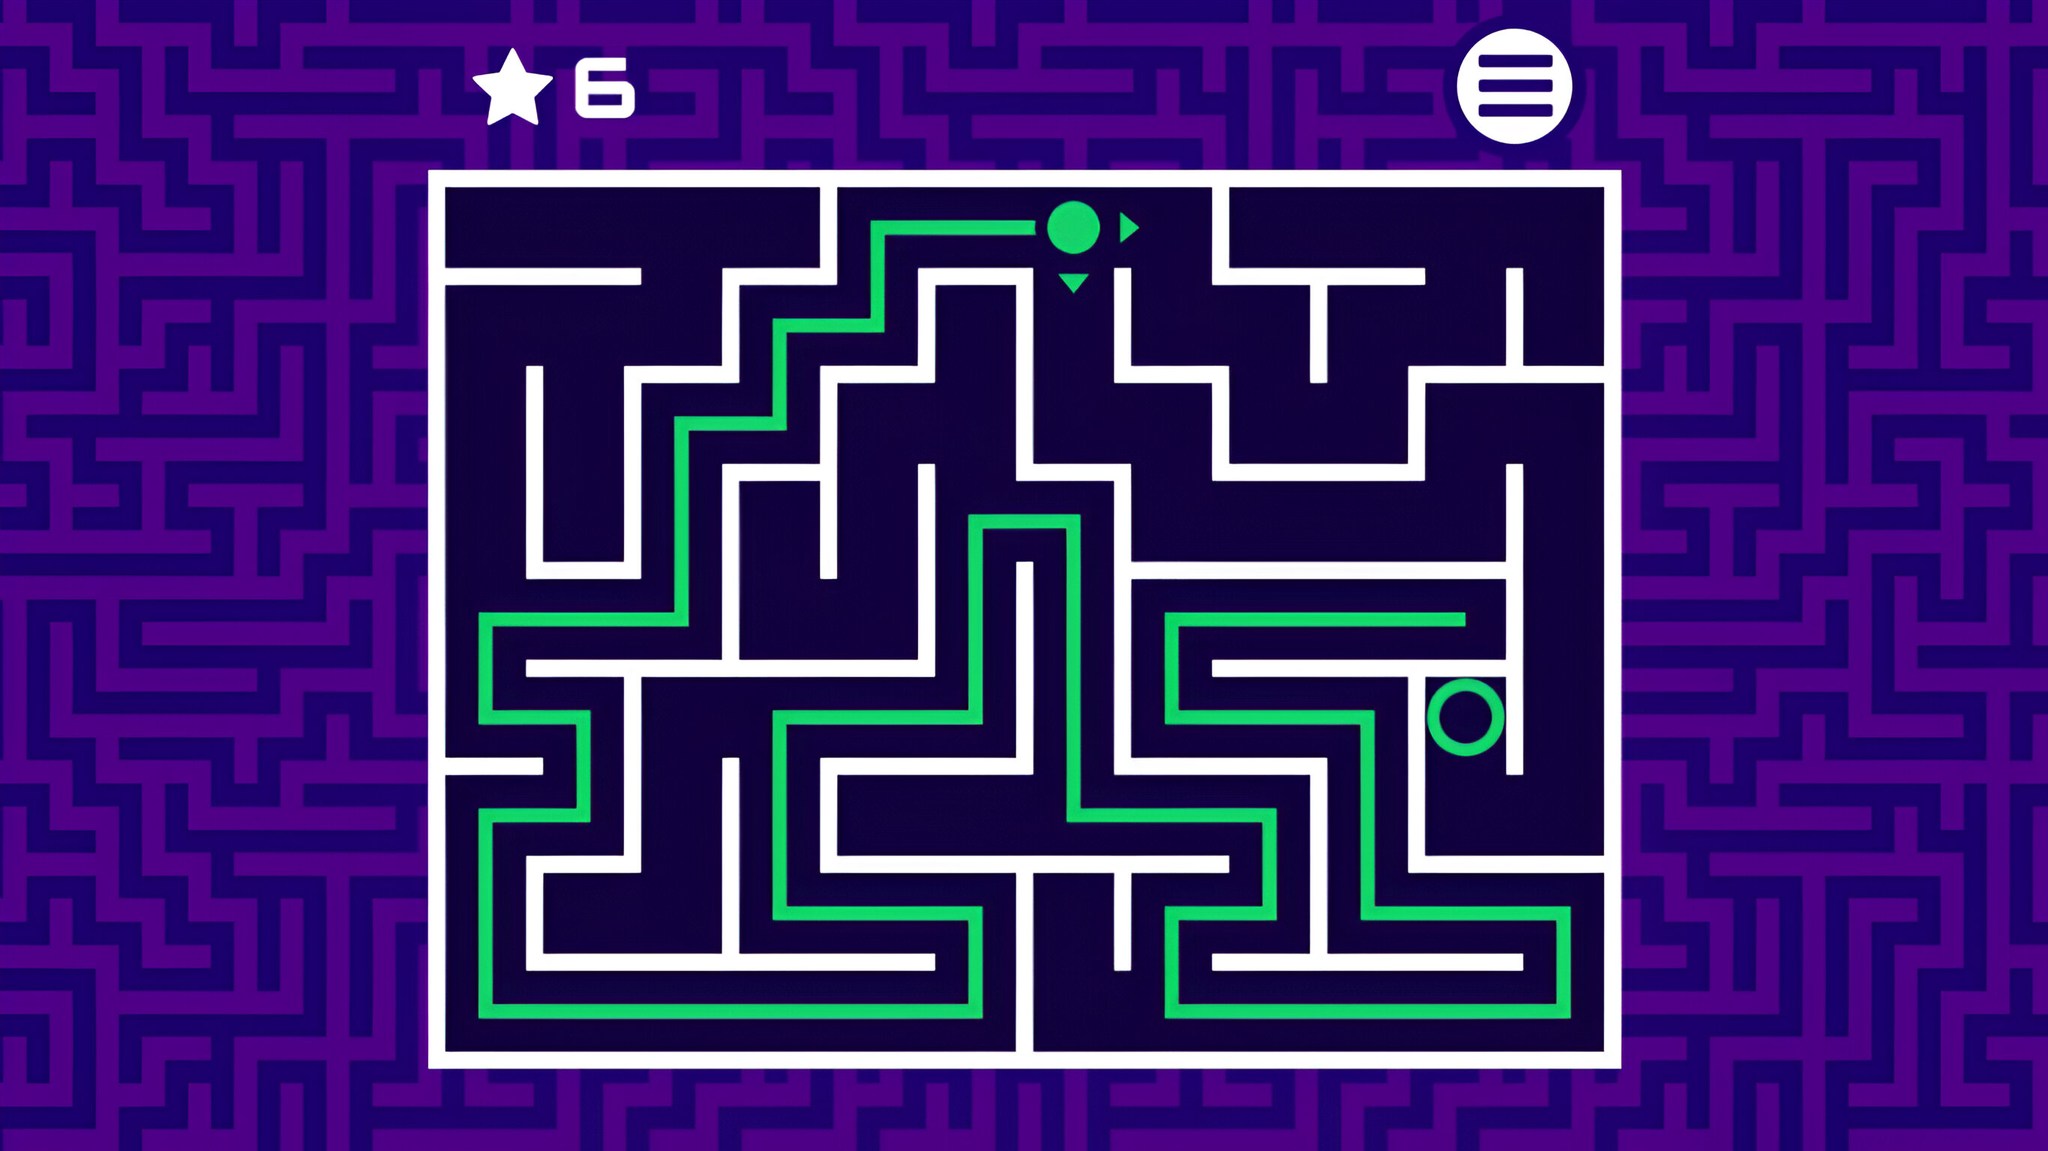 Image Maze - Play Free Online Puzzle Game